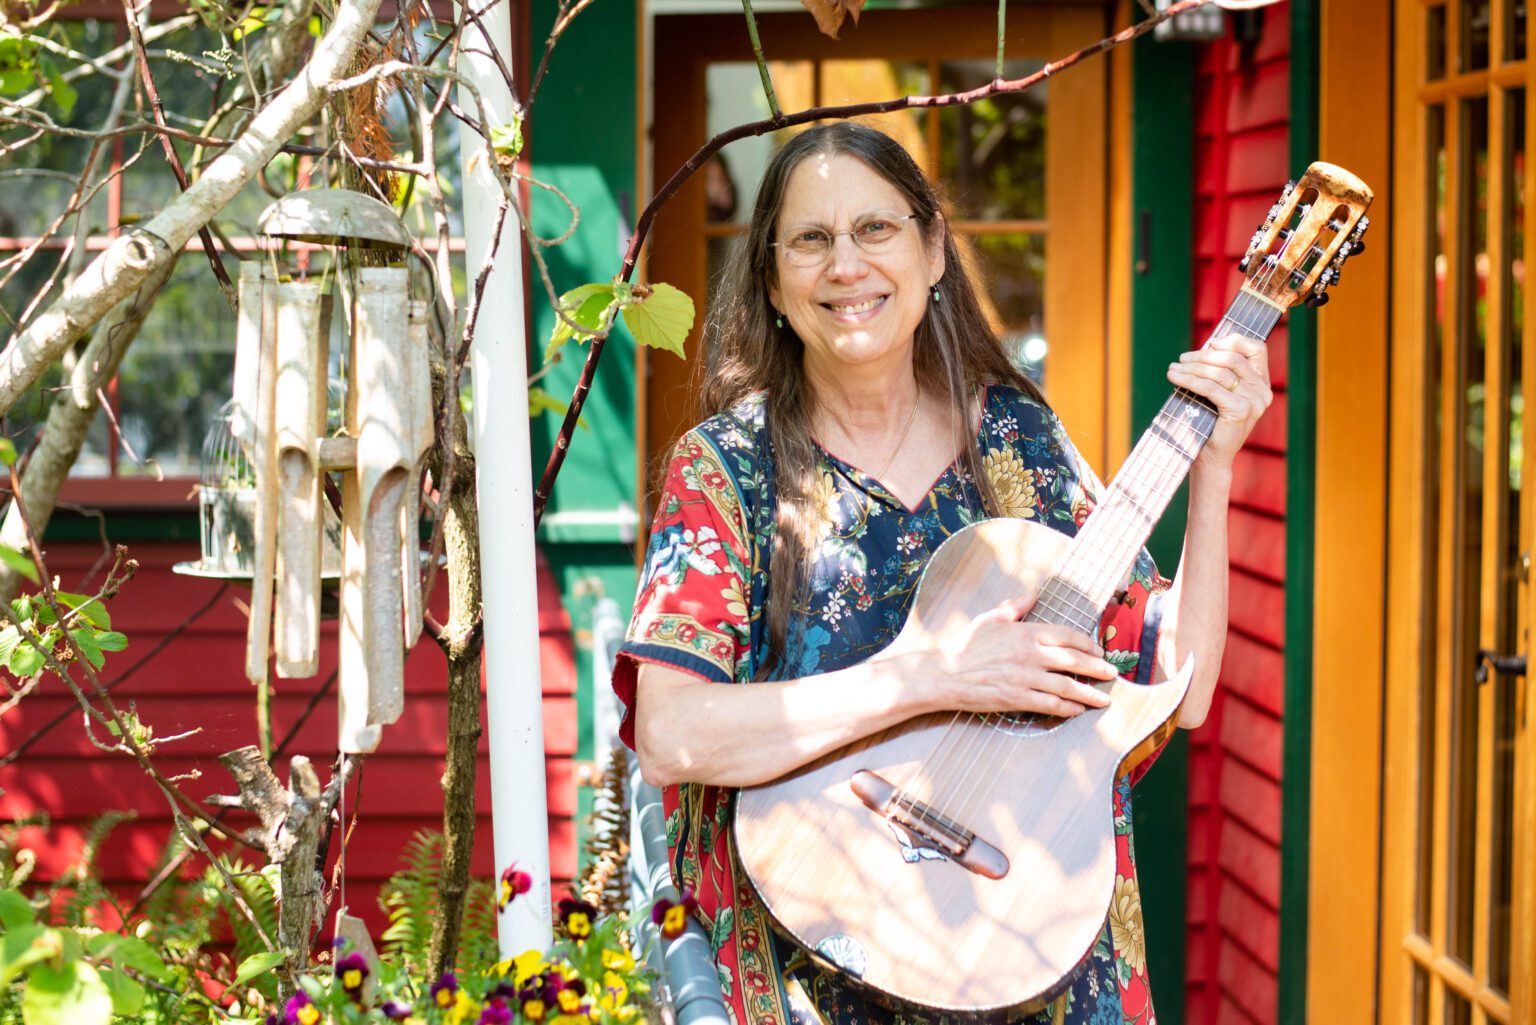 Fl!p Breskin holds her guitar in her backyard. When she moved to the Columbia neighborhood in 1999